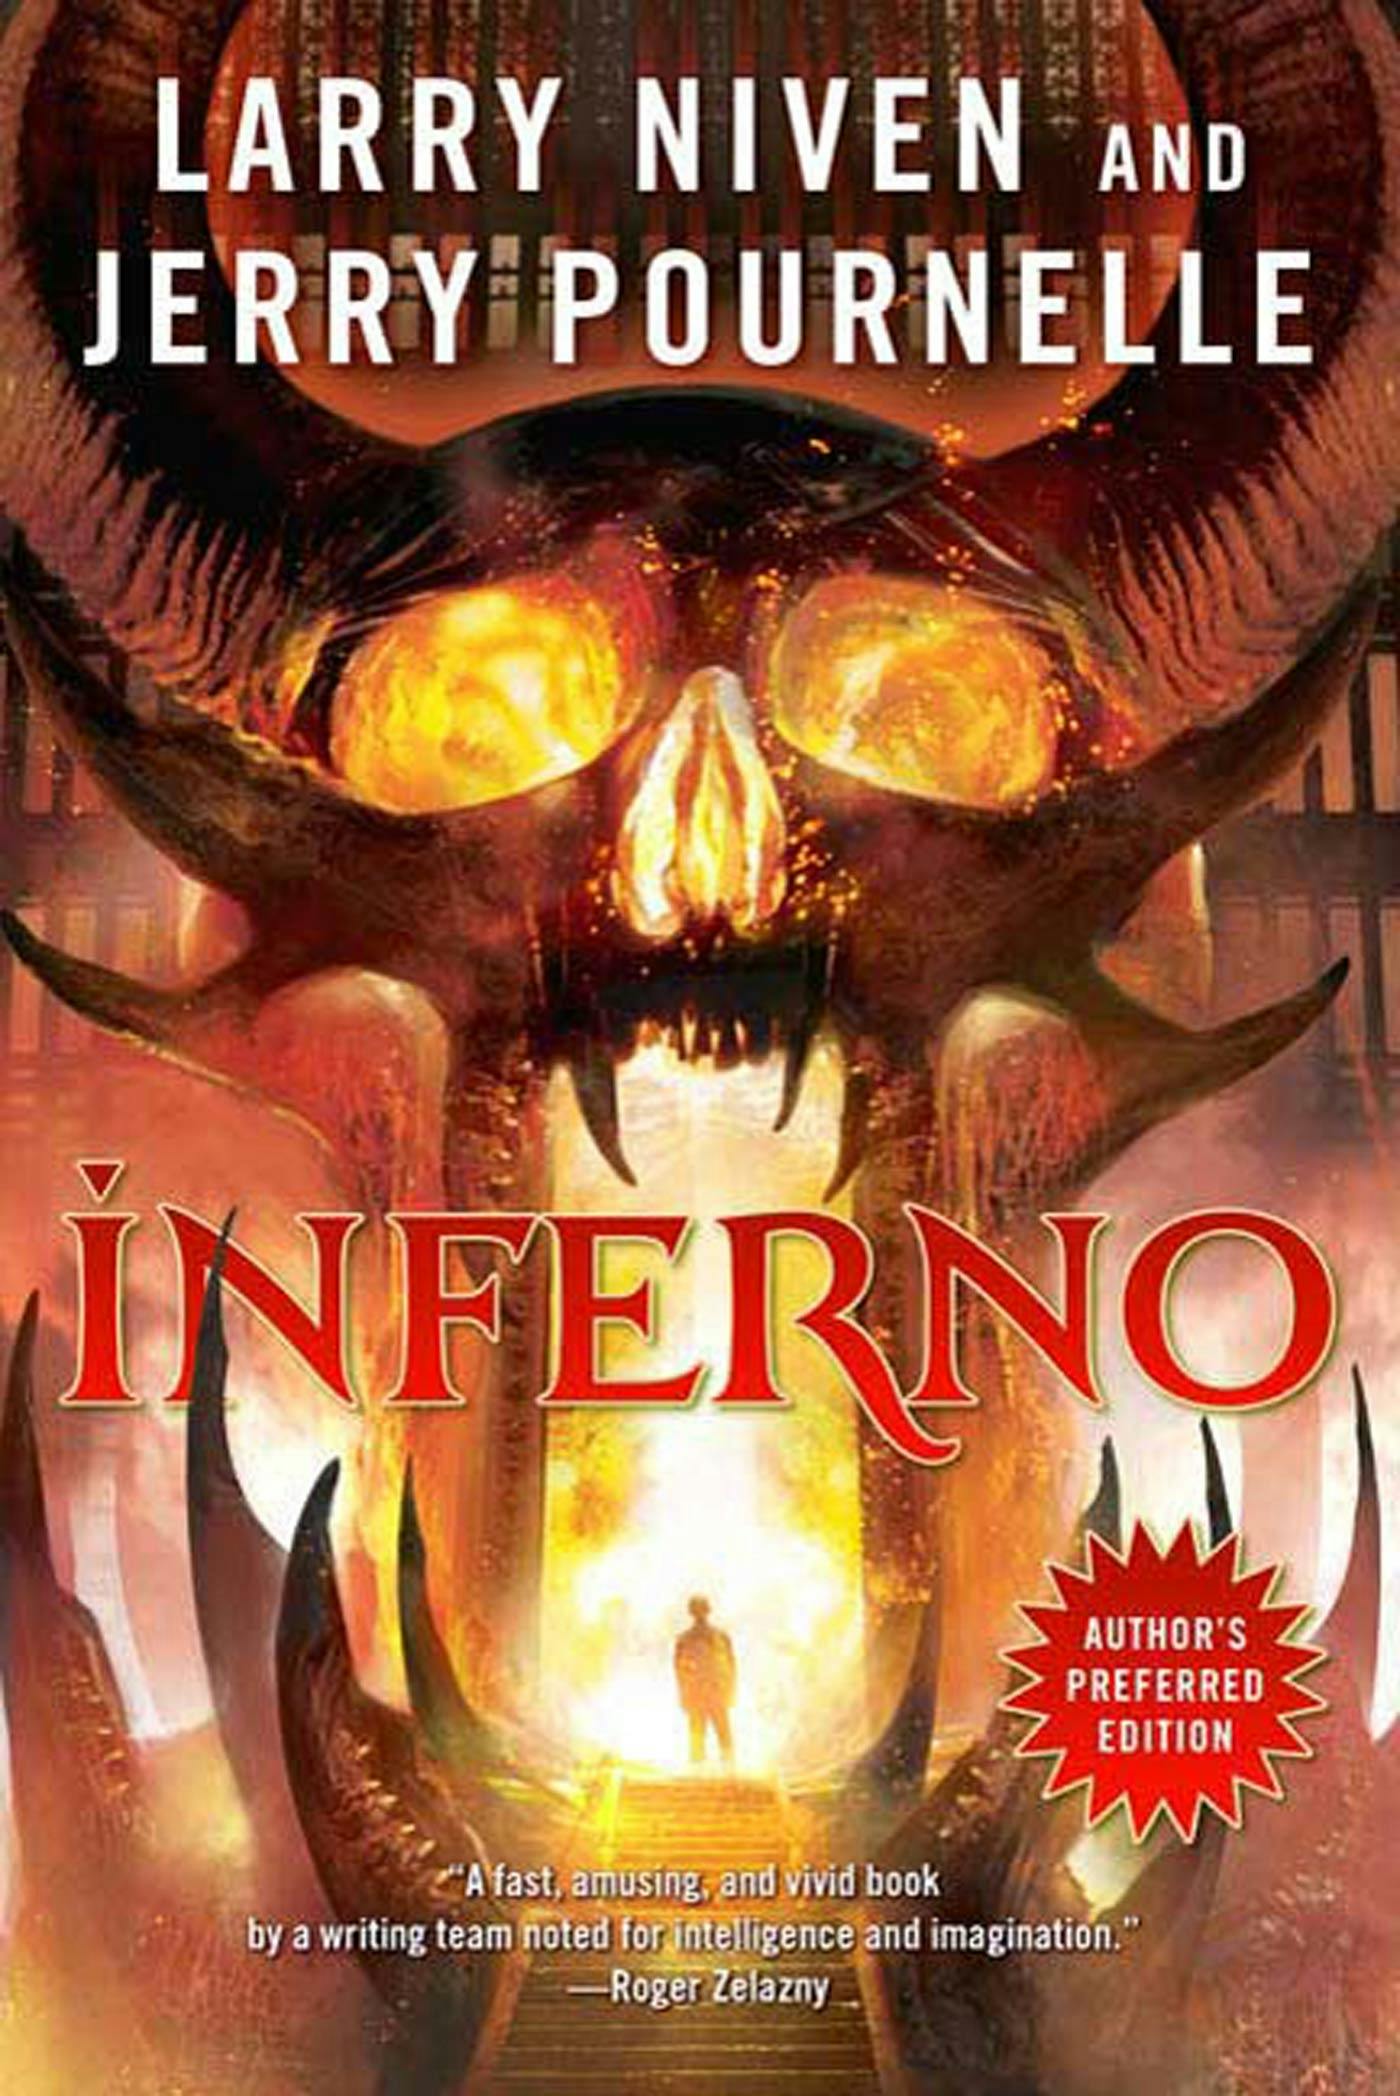 Dante's Inferno (Deluxe Library Edition) (Hardcover)